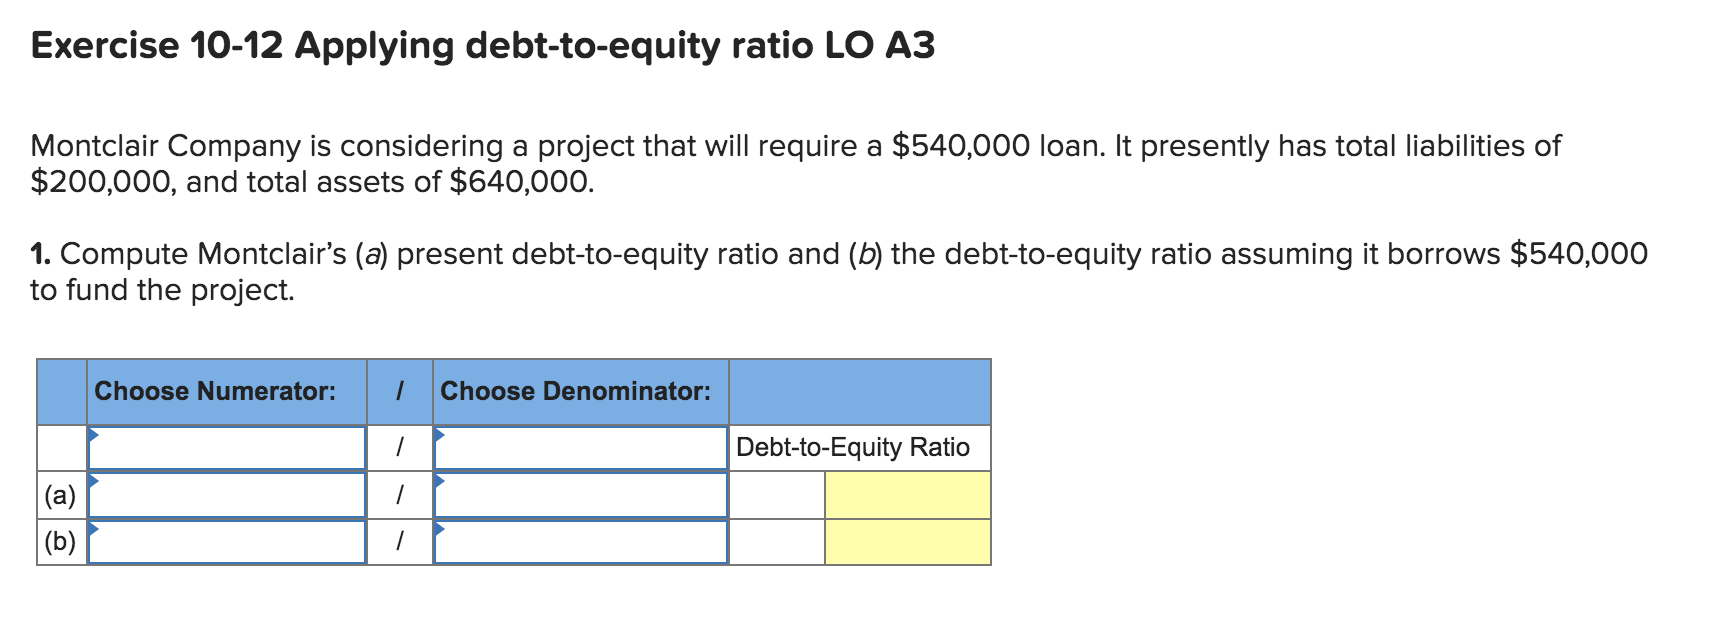 Exercise 10-12 Applying debt-to-equity ratio LO A3
Montclair Company is considering a project that will require a $540,000 loan. It presently has total liabilities of
$200,000, and total assets of $640,000.
1. Compute Montclair's (a) present debt-to-equity ratio and (b) the debt-to-equity ratio assuming it borrows $540,000
to fund the project.
Choose Numerator:
Choose Denominator:
Debt-to-Equity Ratio
|(a)
|(b)
